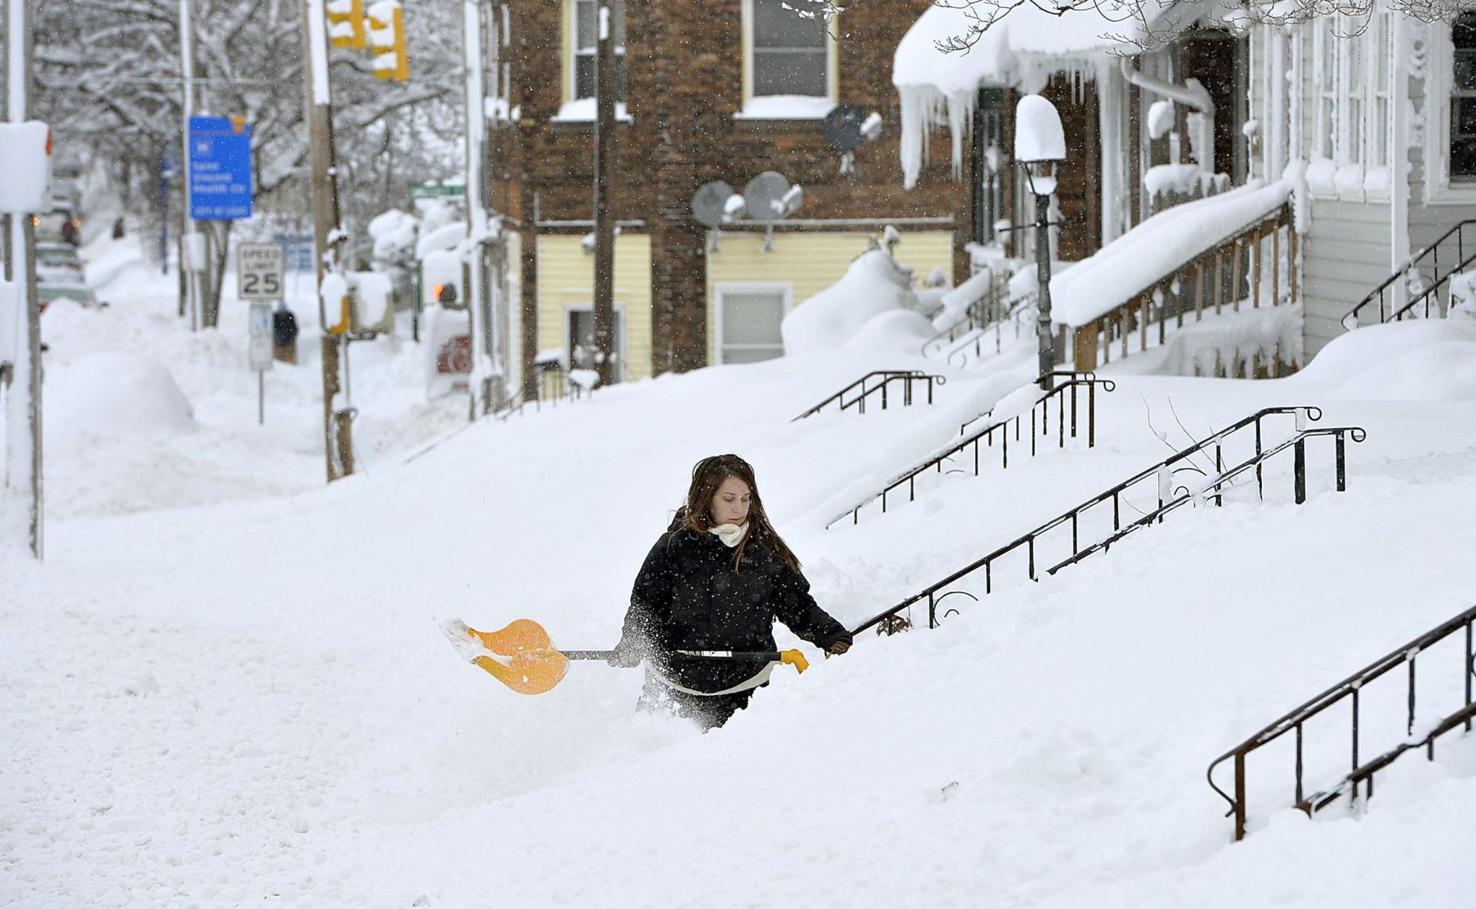 Photos: 60-plus inches of snow in Erie, Pa., as winter weather wallops